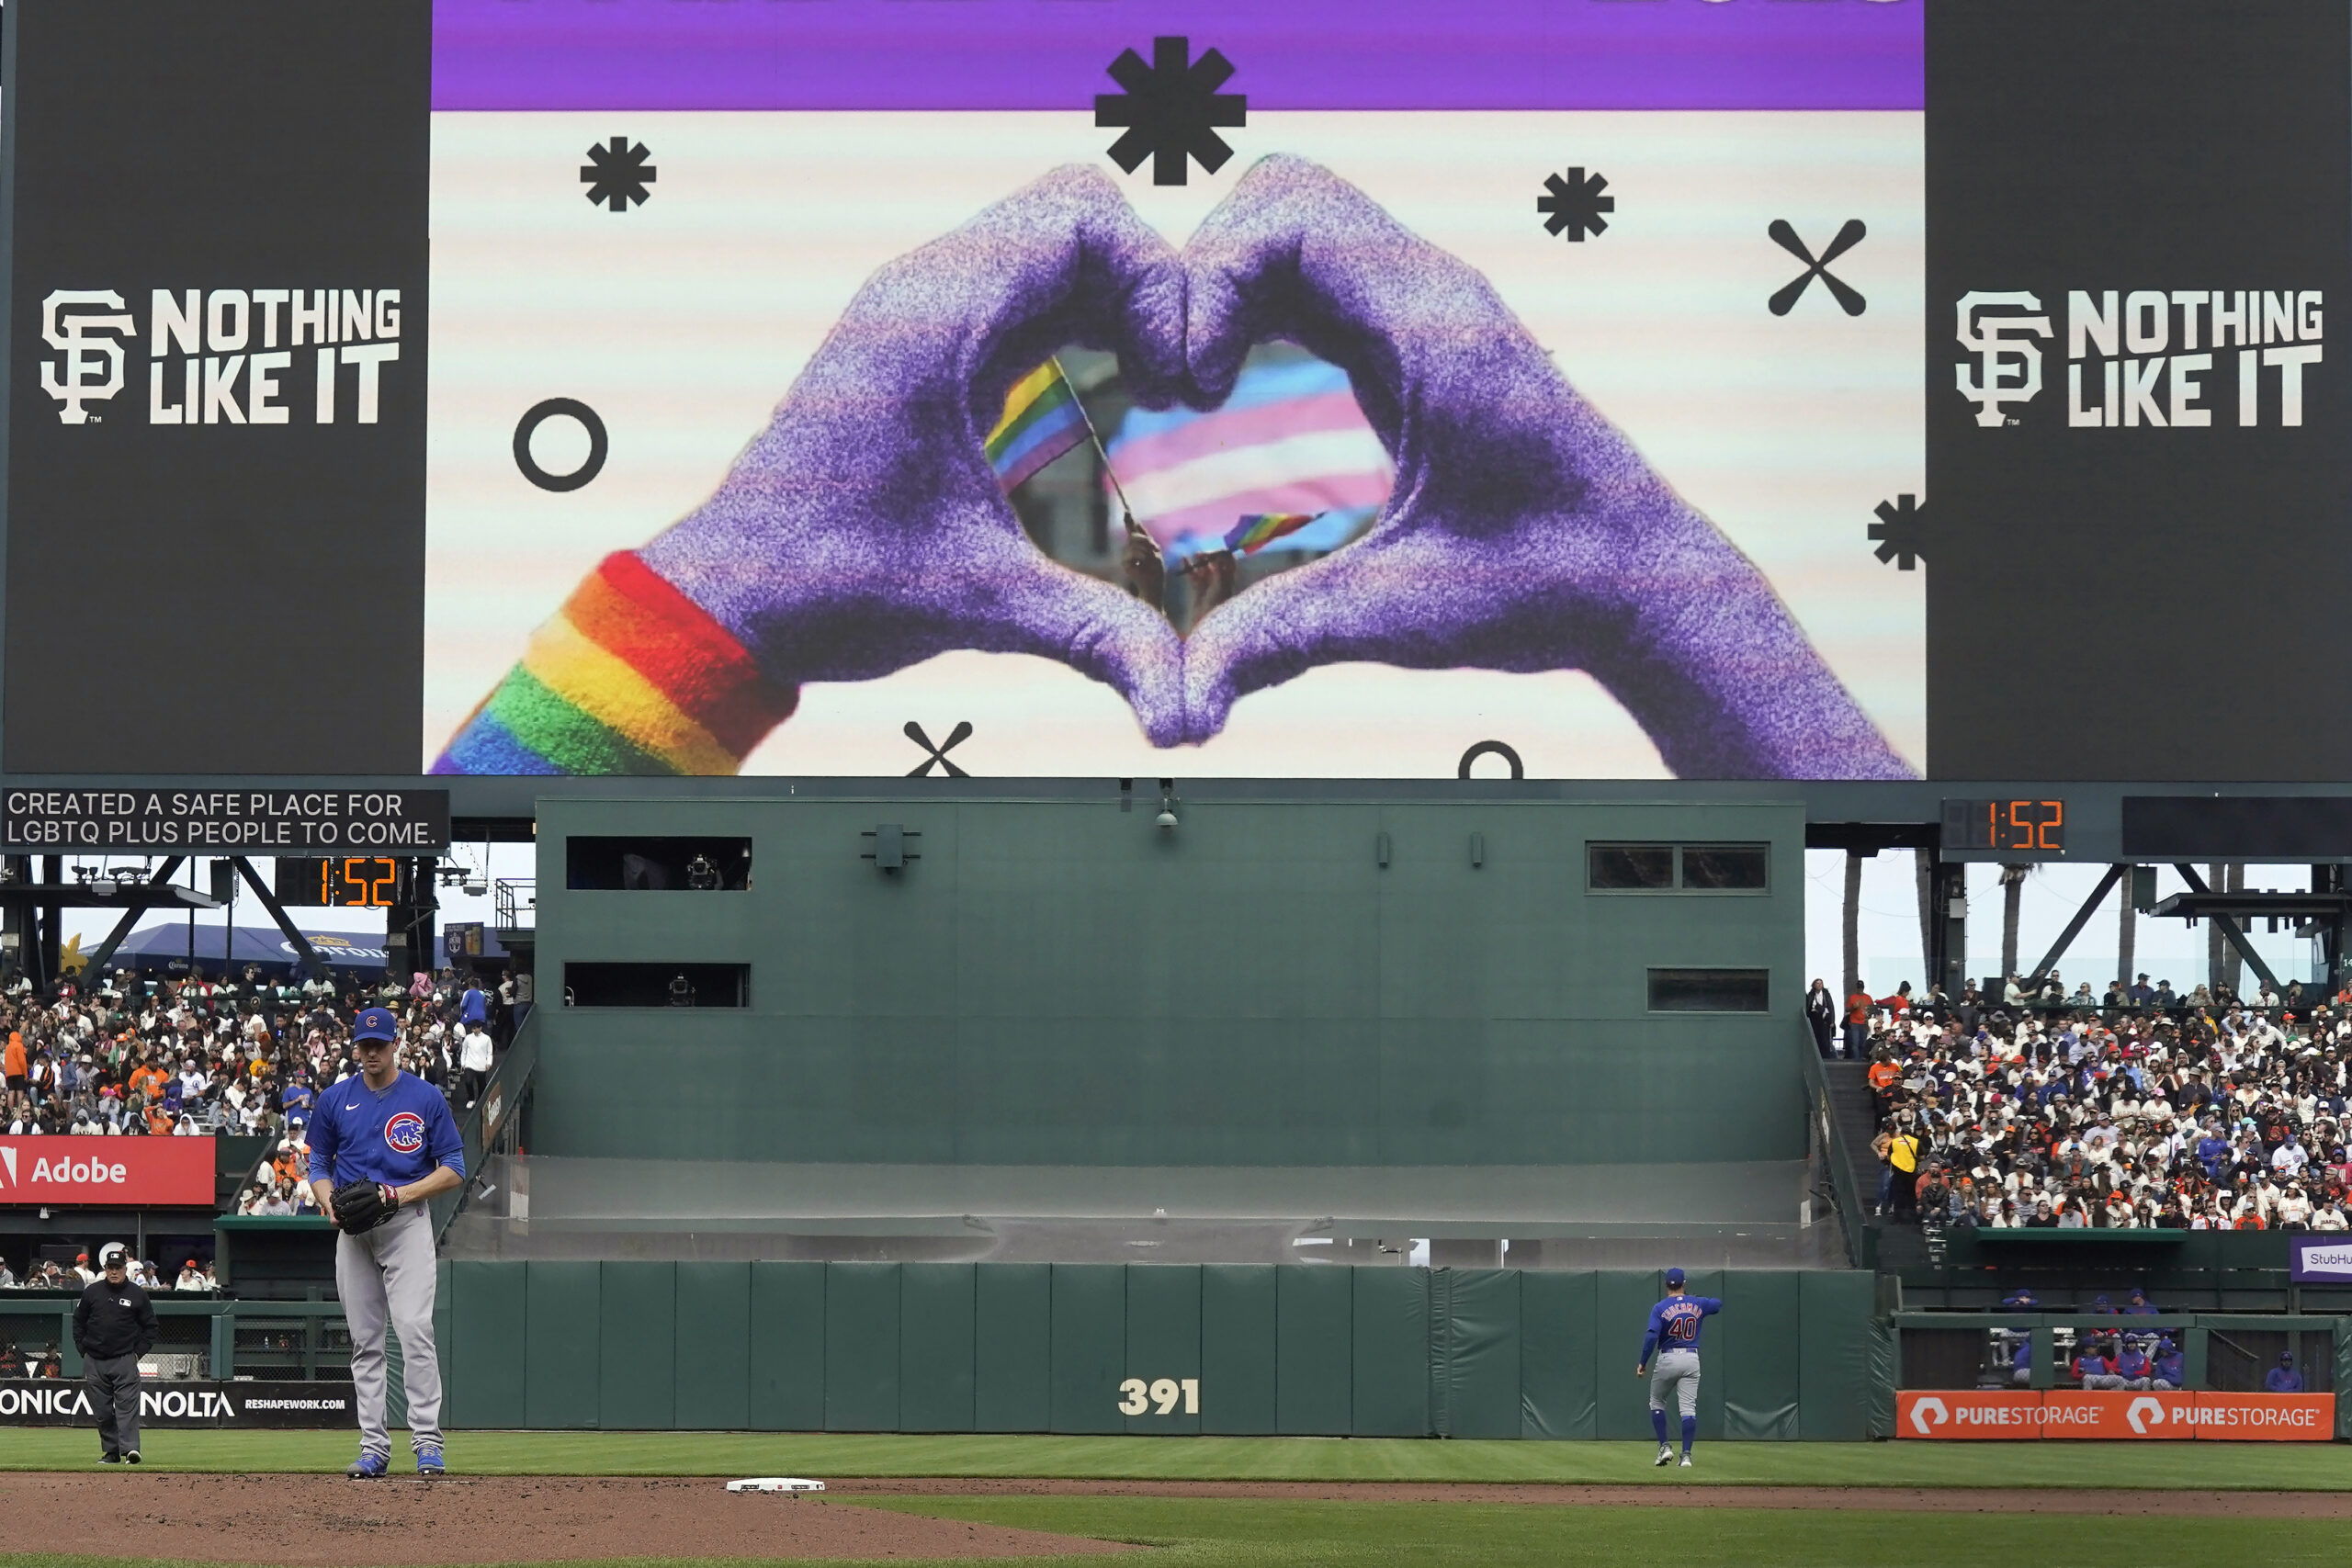 Every player and umpire wore rainbow logos for Dodgers Pride Night